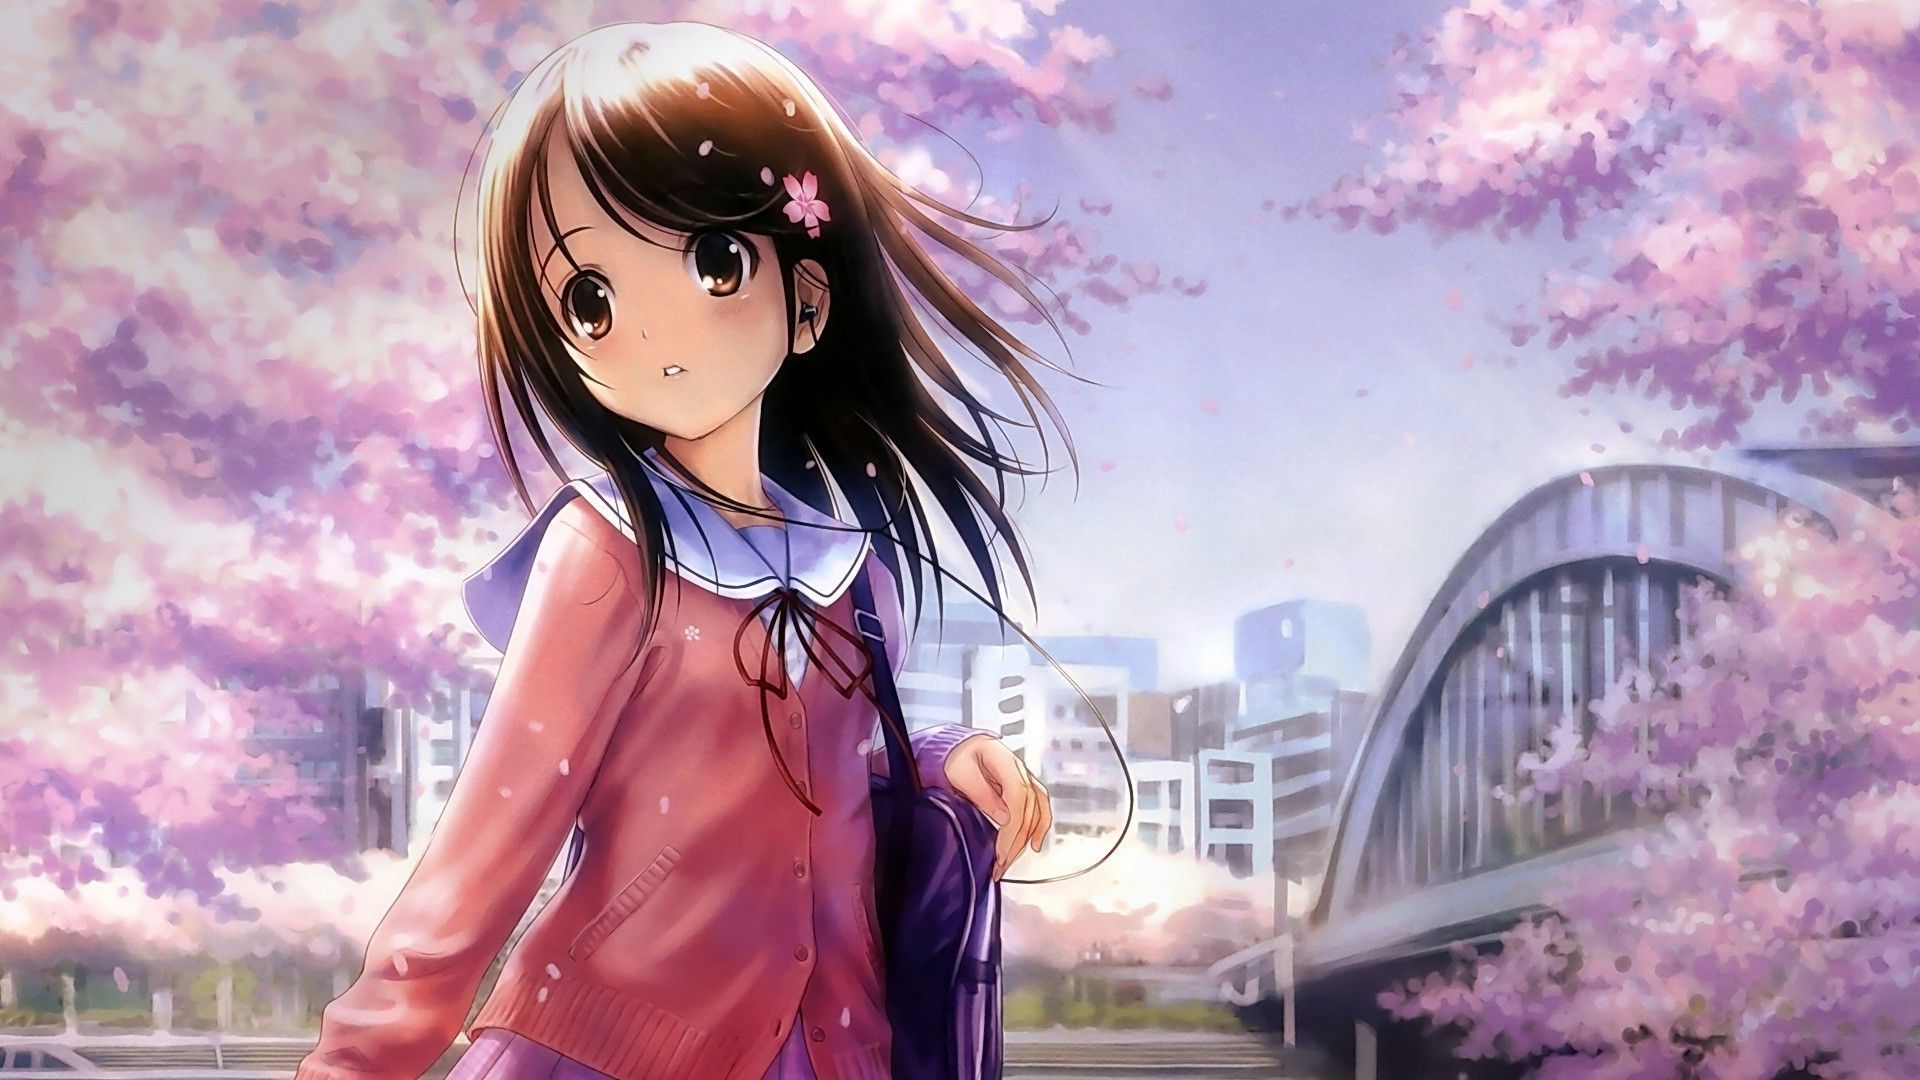 Cool And Cute Anime Girl Wallpapers Wallpapers